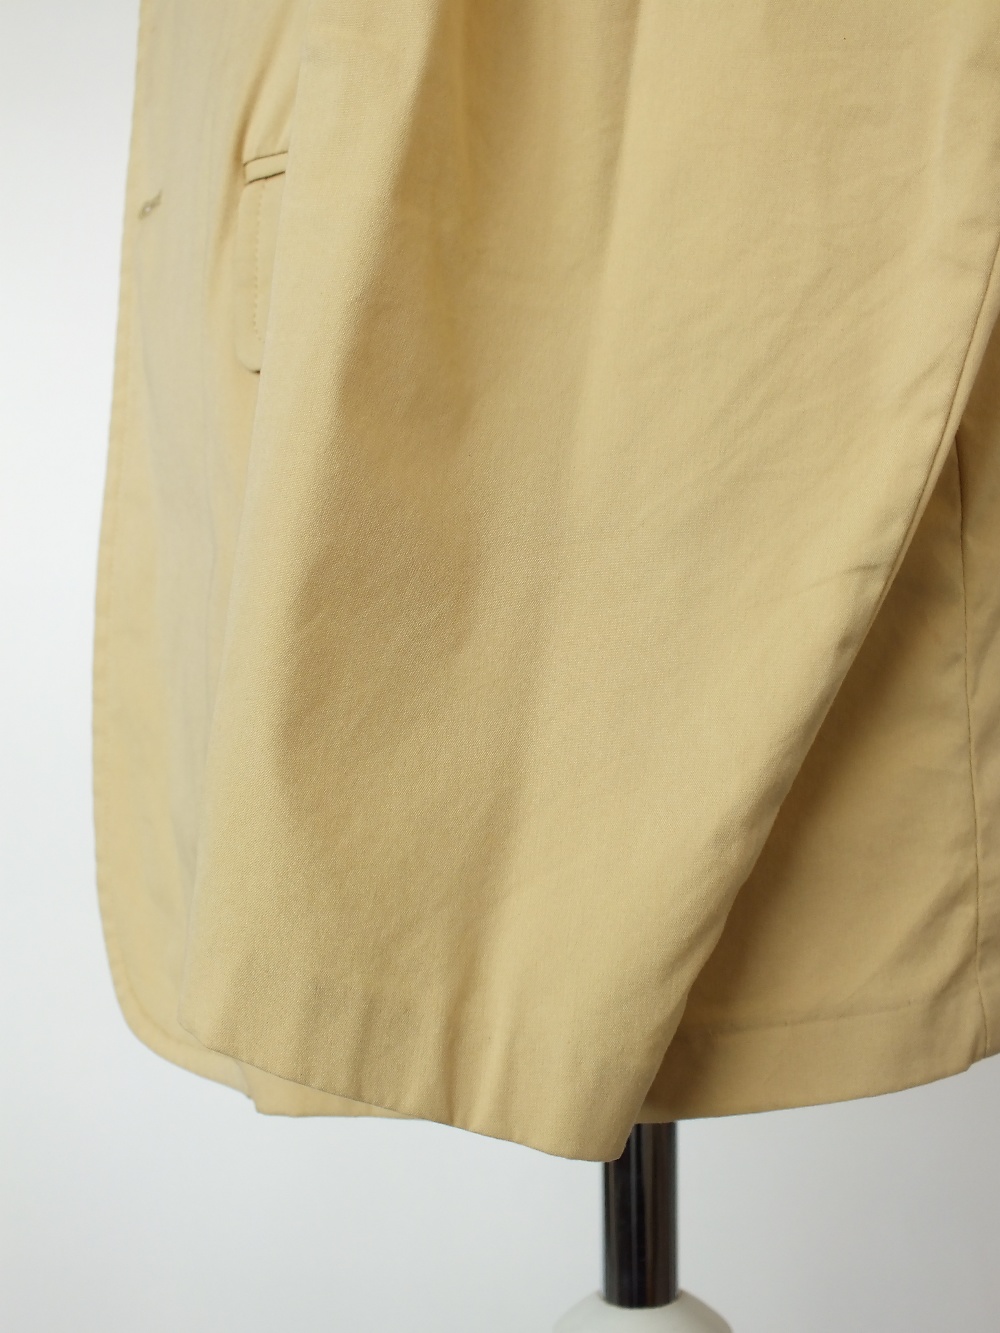 A Prada suit, sand, jacket unlined, 78% cotton, 5% spandex, 17% nylon, flat front to trousers, - Image 5 of 6